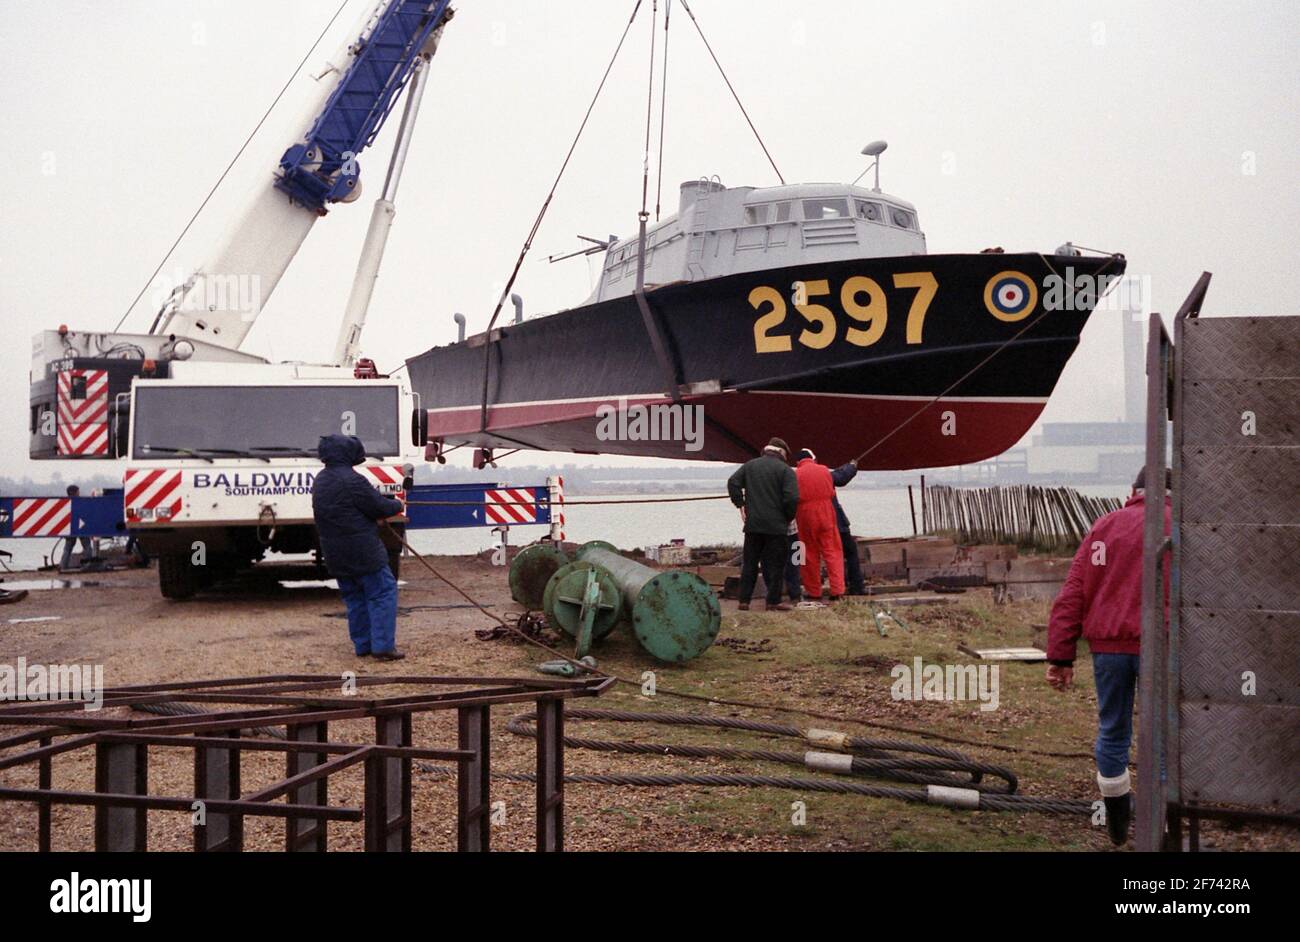 AJAXNETPHOTO. 7TH FEBRUARY, 1996. CALSHOT, ENGLAND. -ASR LIFT - AIR SEA RESCUE CRAFT 2597 BEING LIFTED INTO THE WATER AT CALSHOT SPIT AHEAD OF TOW TO THE HAMBLE RIVER AND A NEW MOORING.  PHOTO: JONATHAN EASTLAND/AJAX  REF:960702 27 Stock Photo